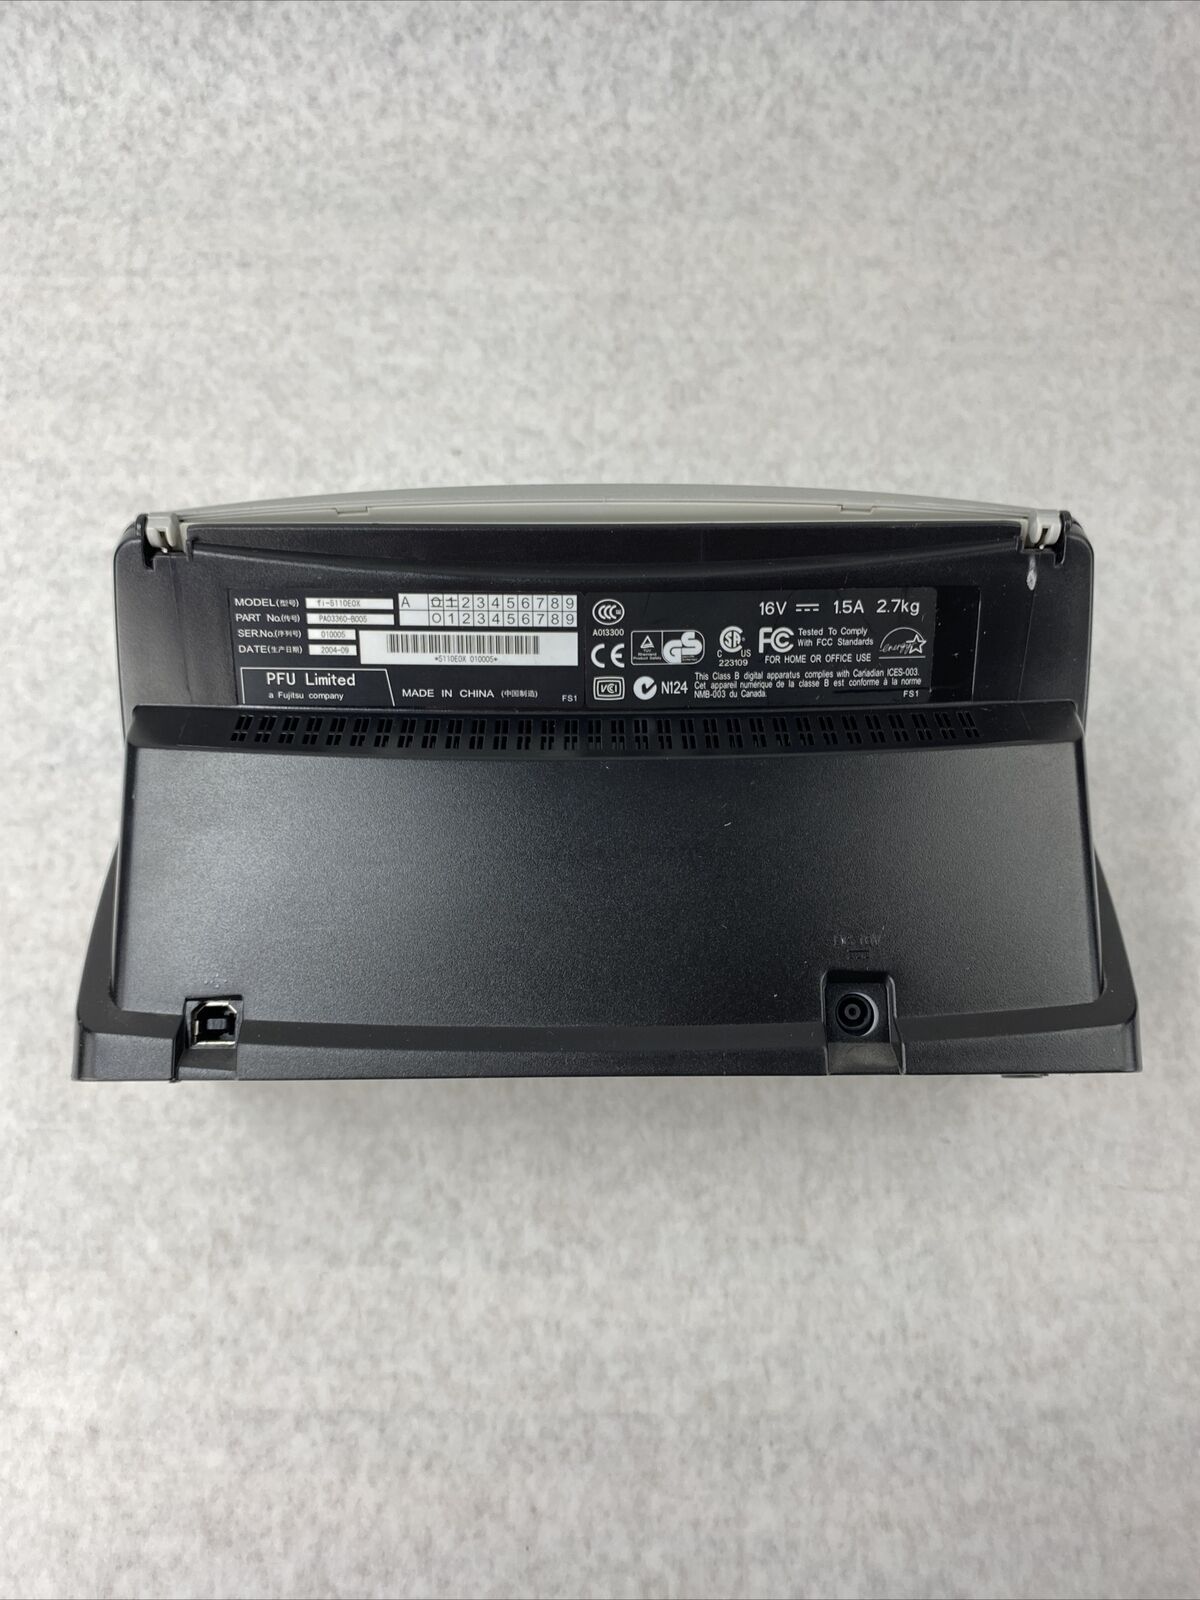 Fujitsu Scansnap fi-5110EOX Color Image Document Scanner PA03360-B005